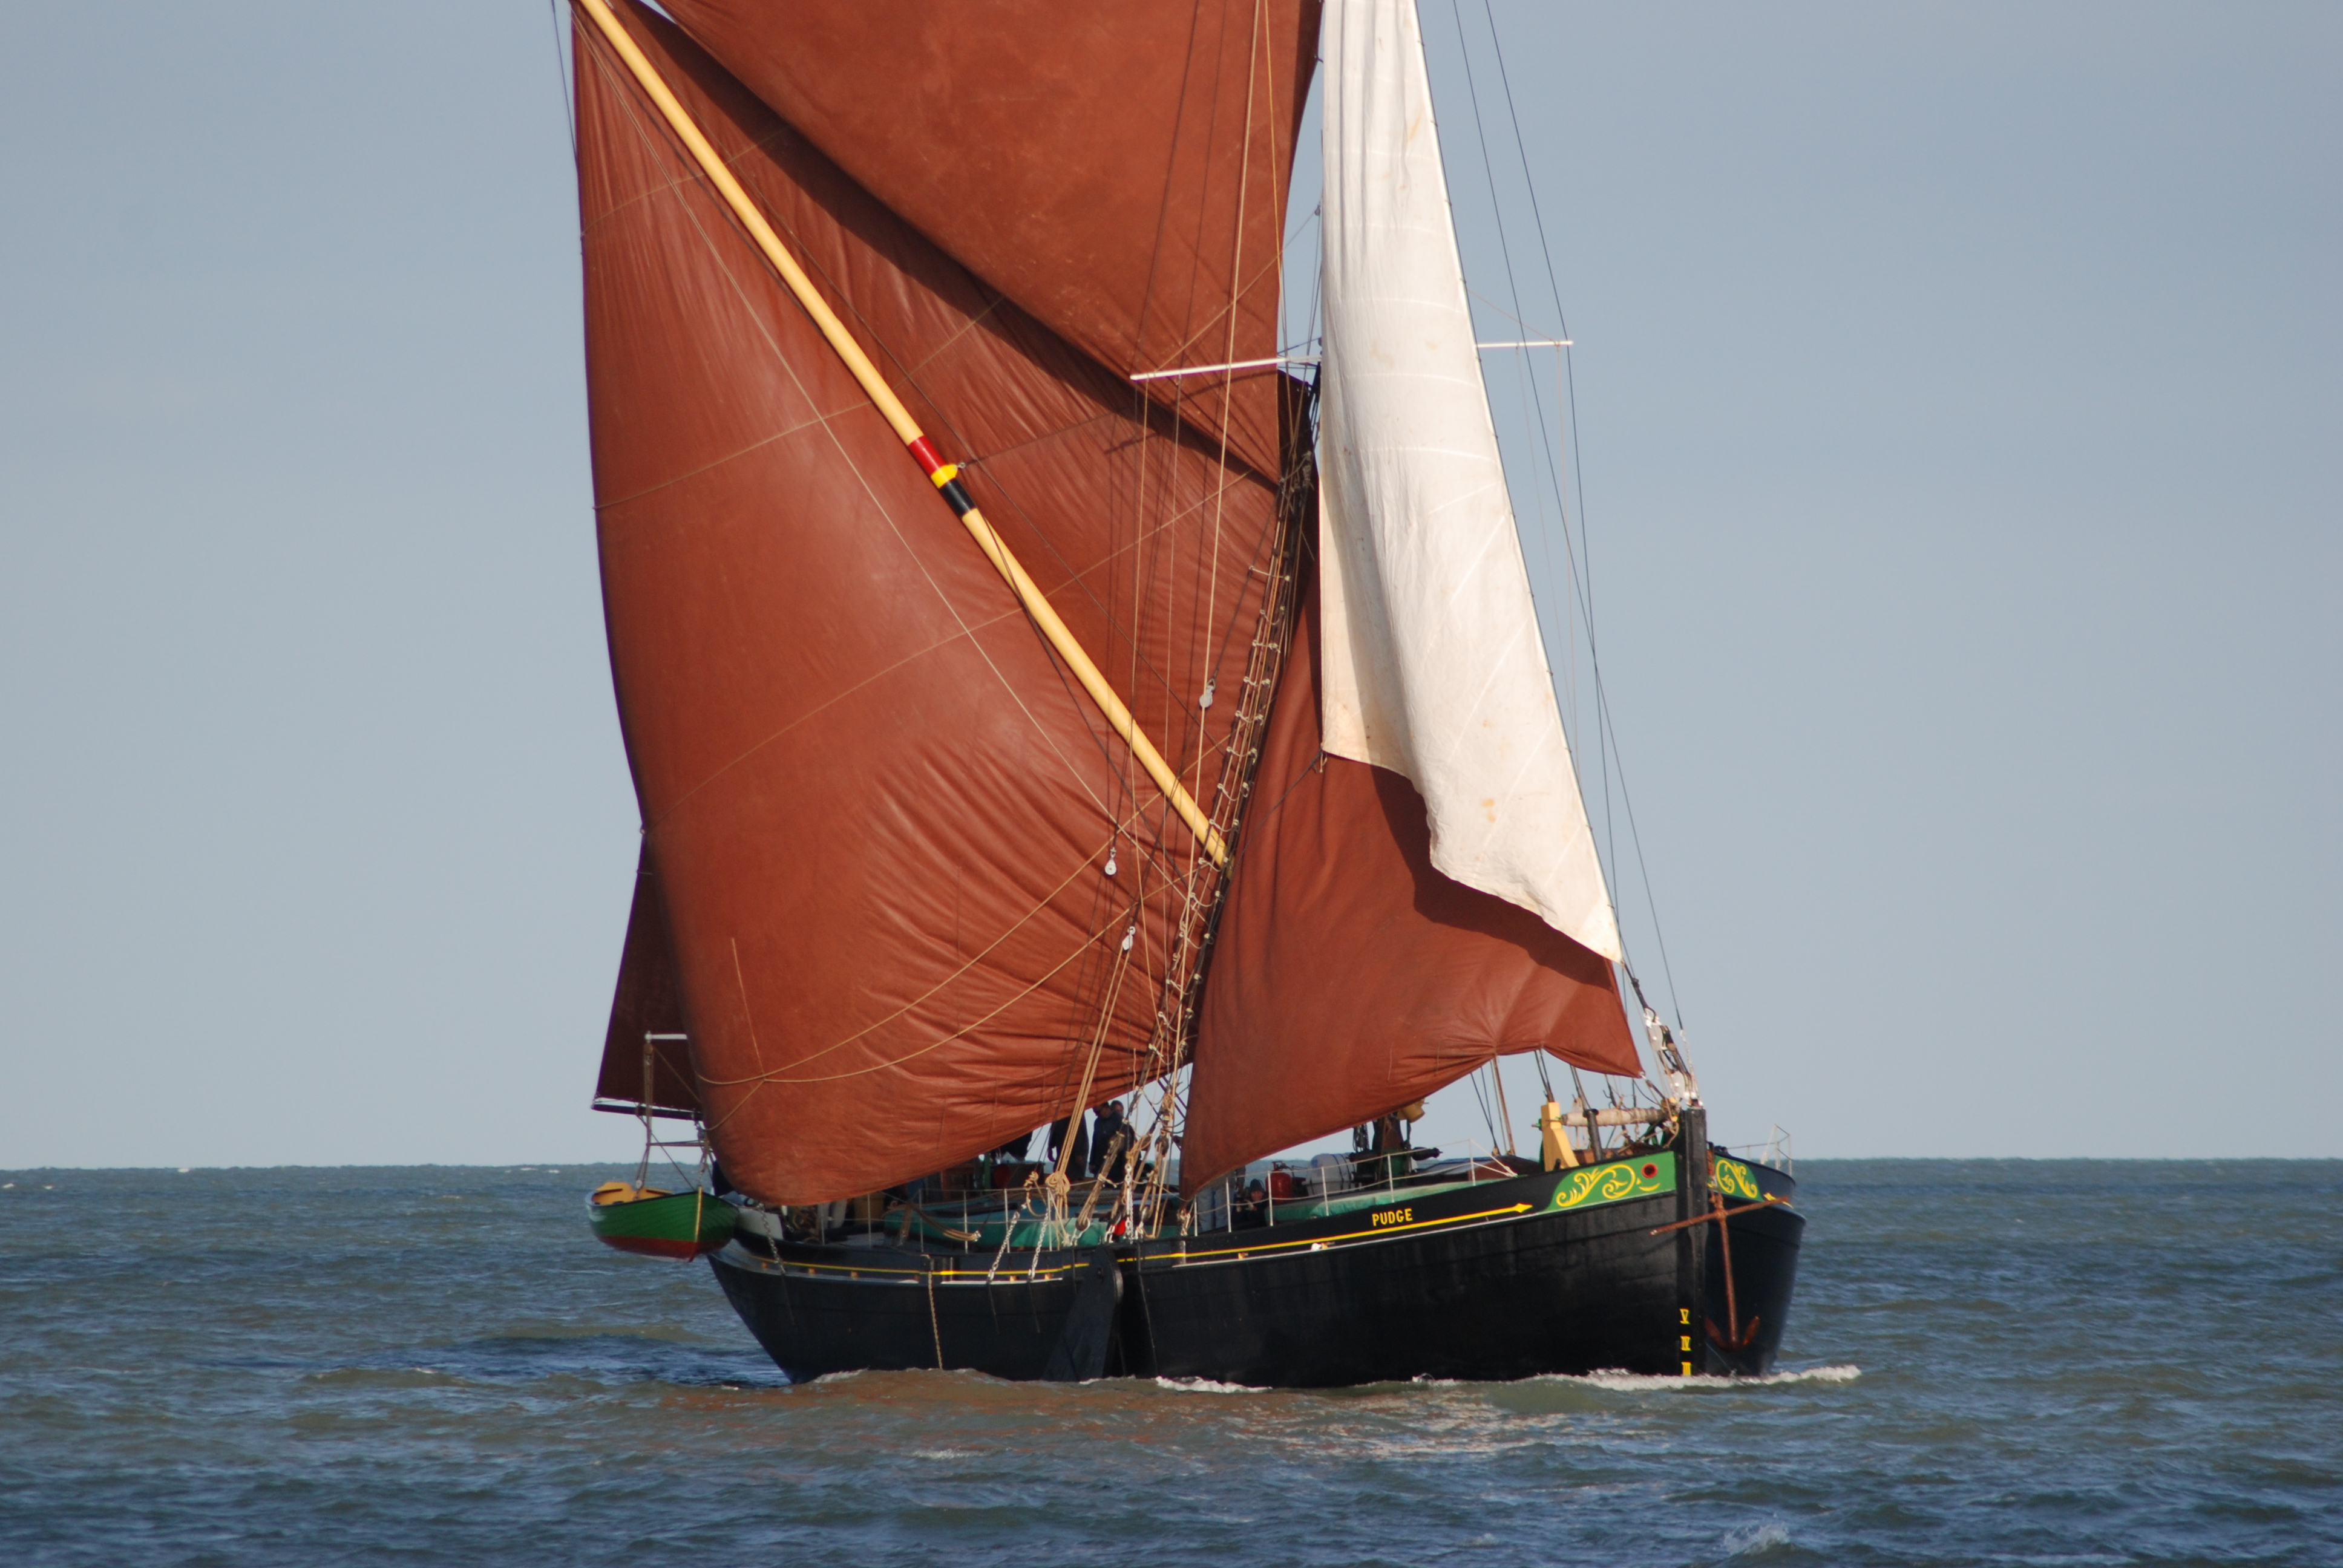 Pudges-first-sail-2007-after-rebuild1